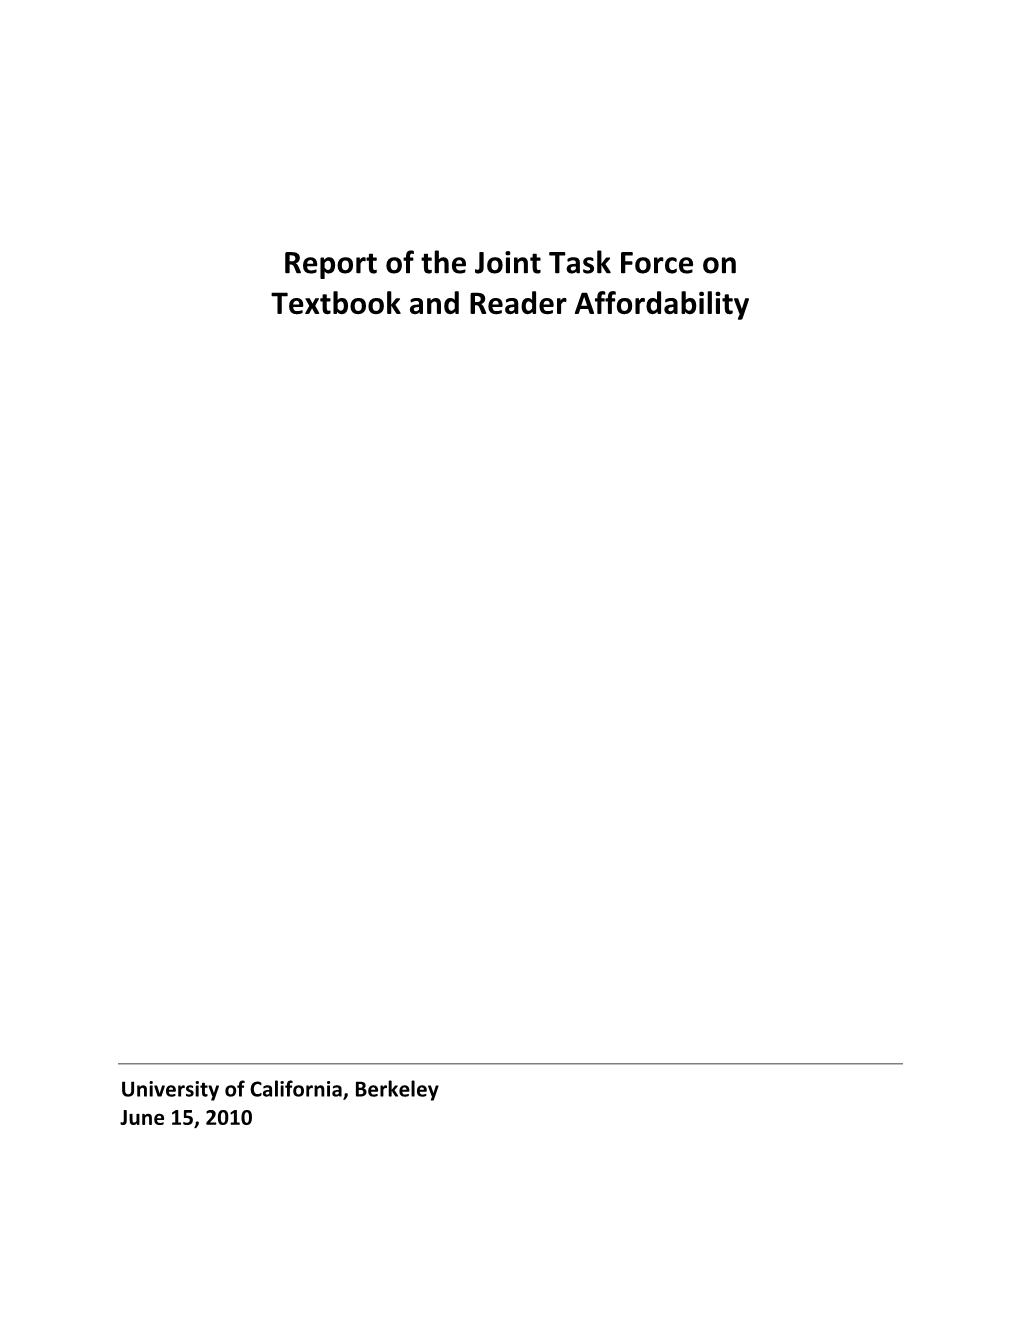 Joint Task Force on Textbook and Reader Affordability